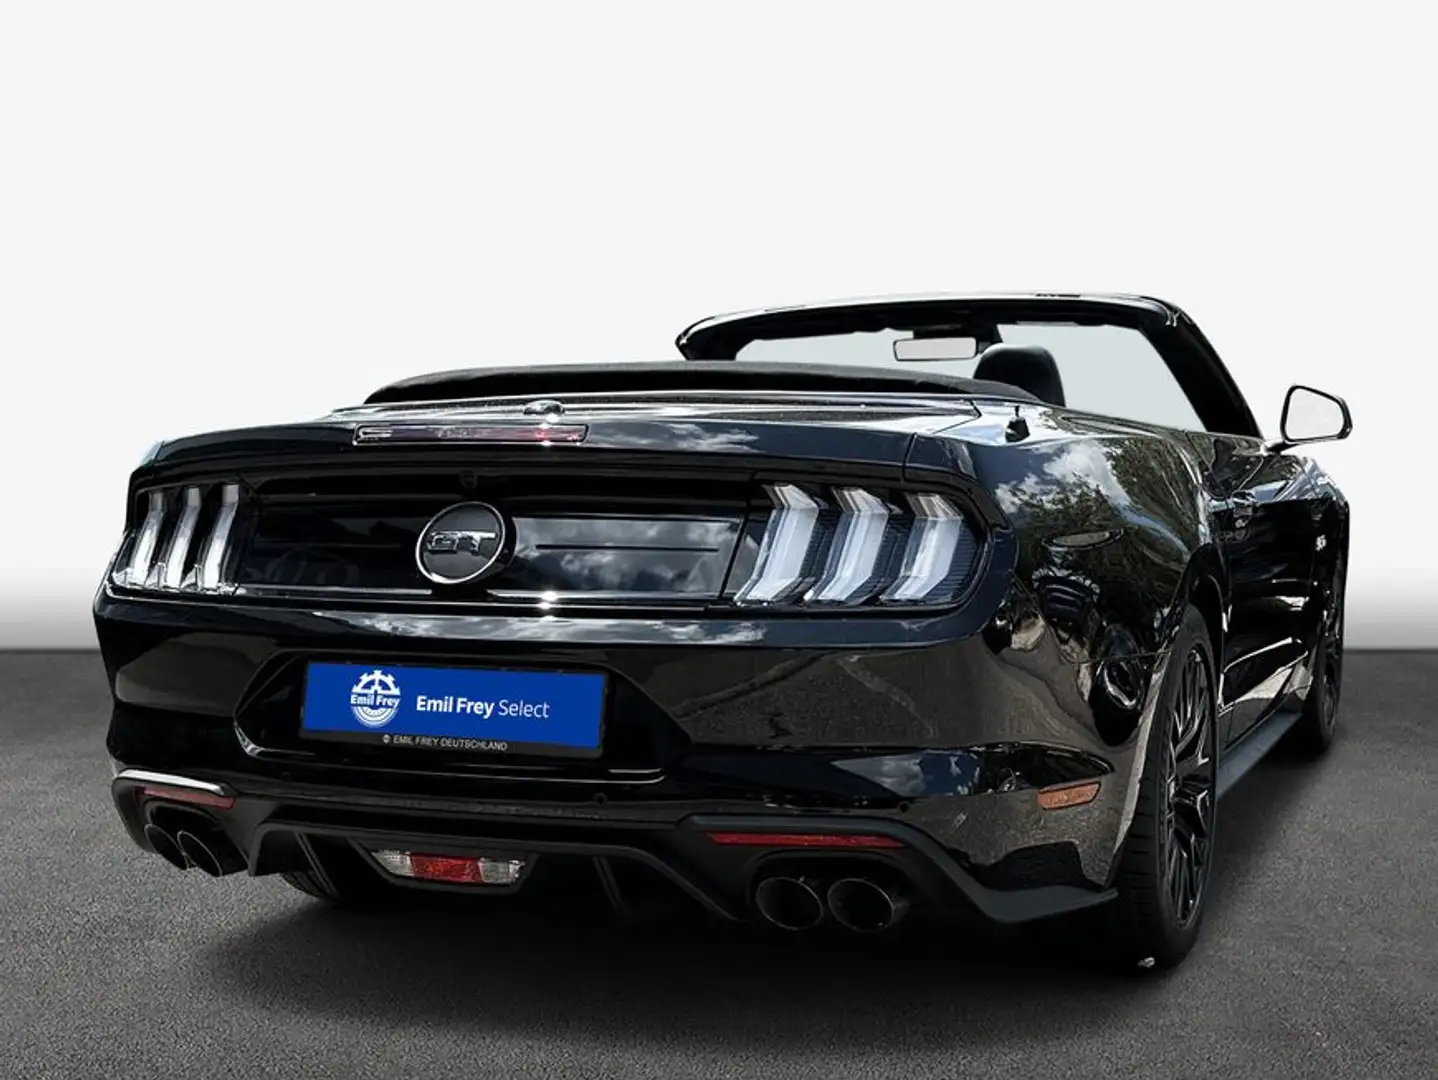 Ford Mustang Convertible 5.0 Ti-VCT V8 Aut. GT 330 kW, Fekete - 2